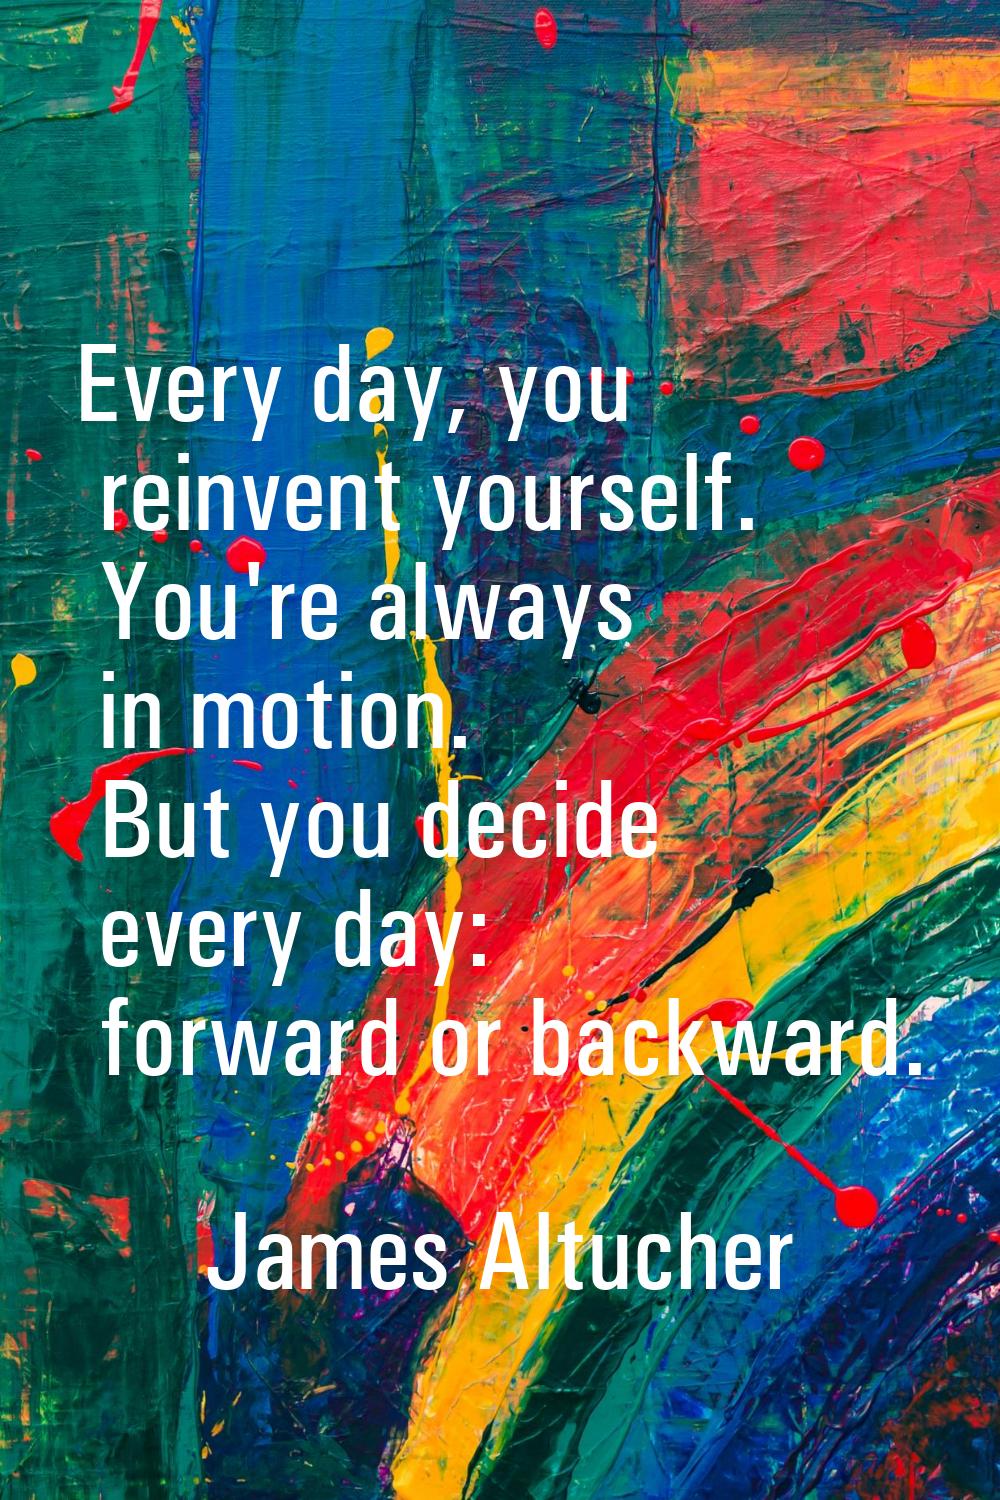 Every day, you reinvent yourself. You're always in motion. But you decide every day: forward or bac